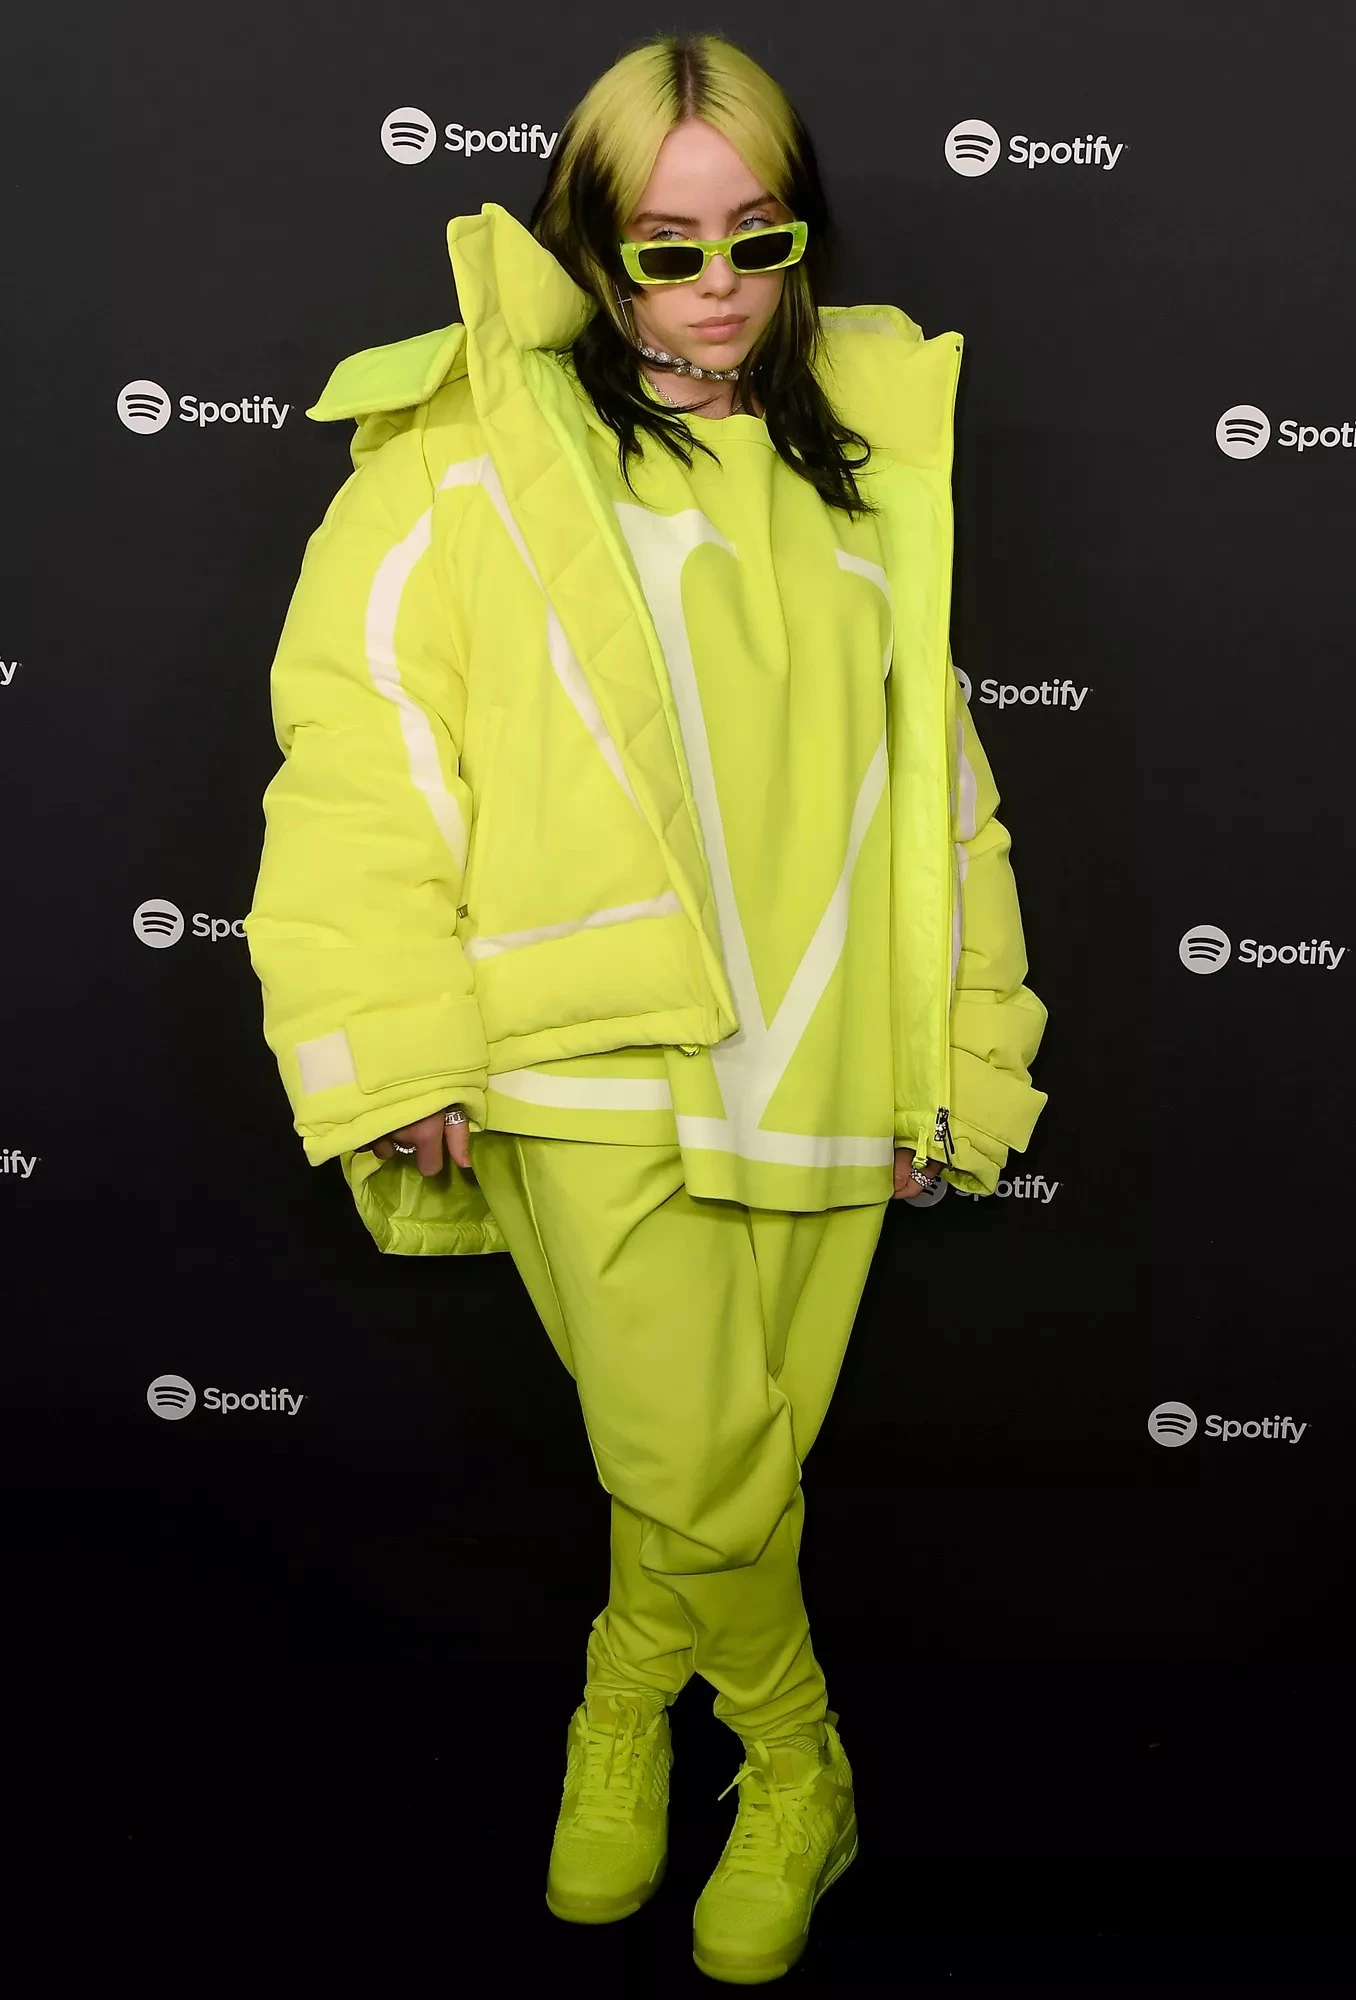 15+ Billie Eilish’s Outfits That Leaves Us In Awe